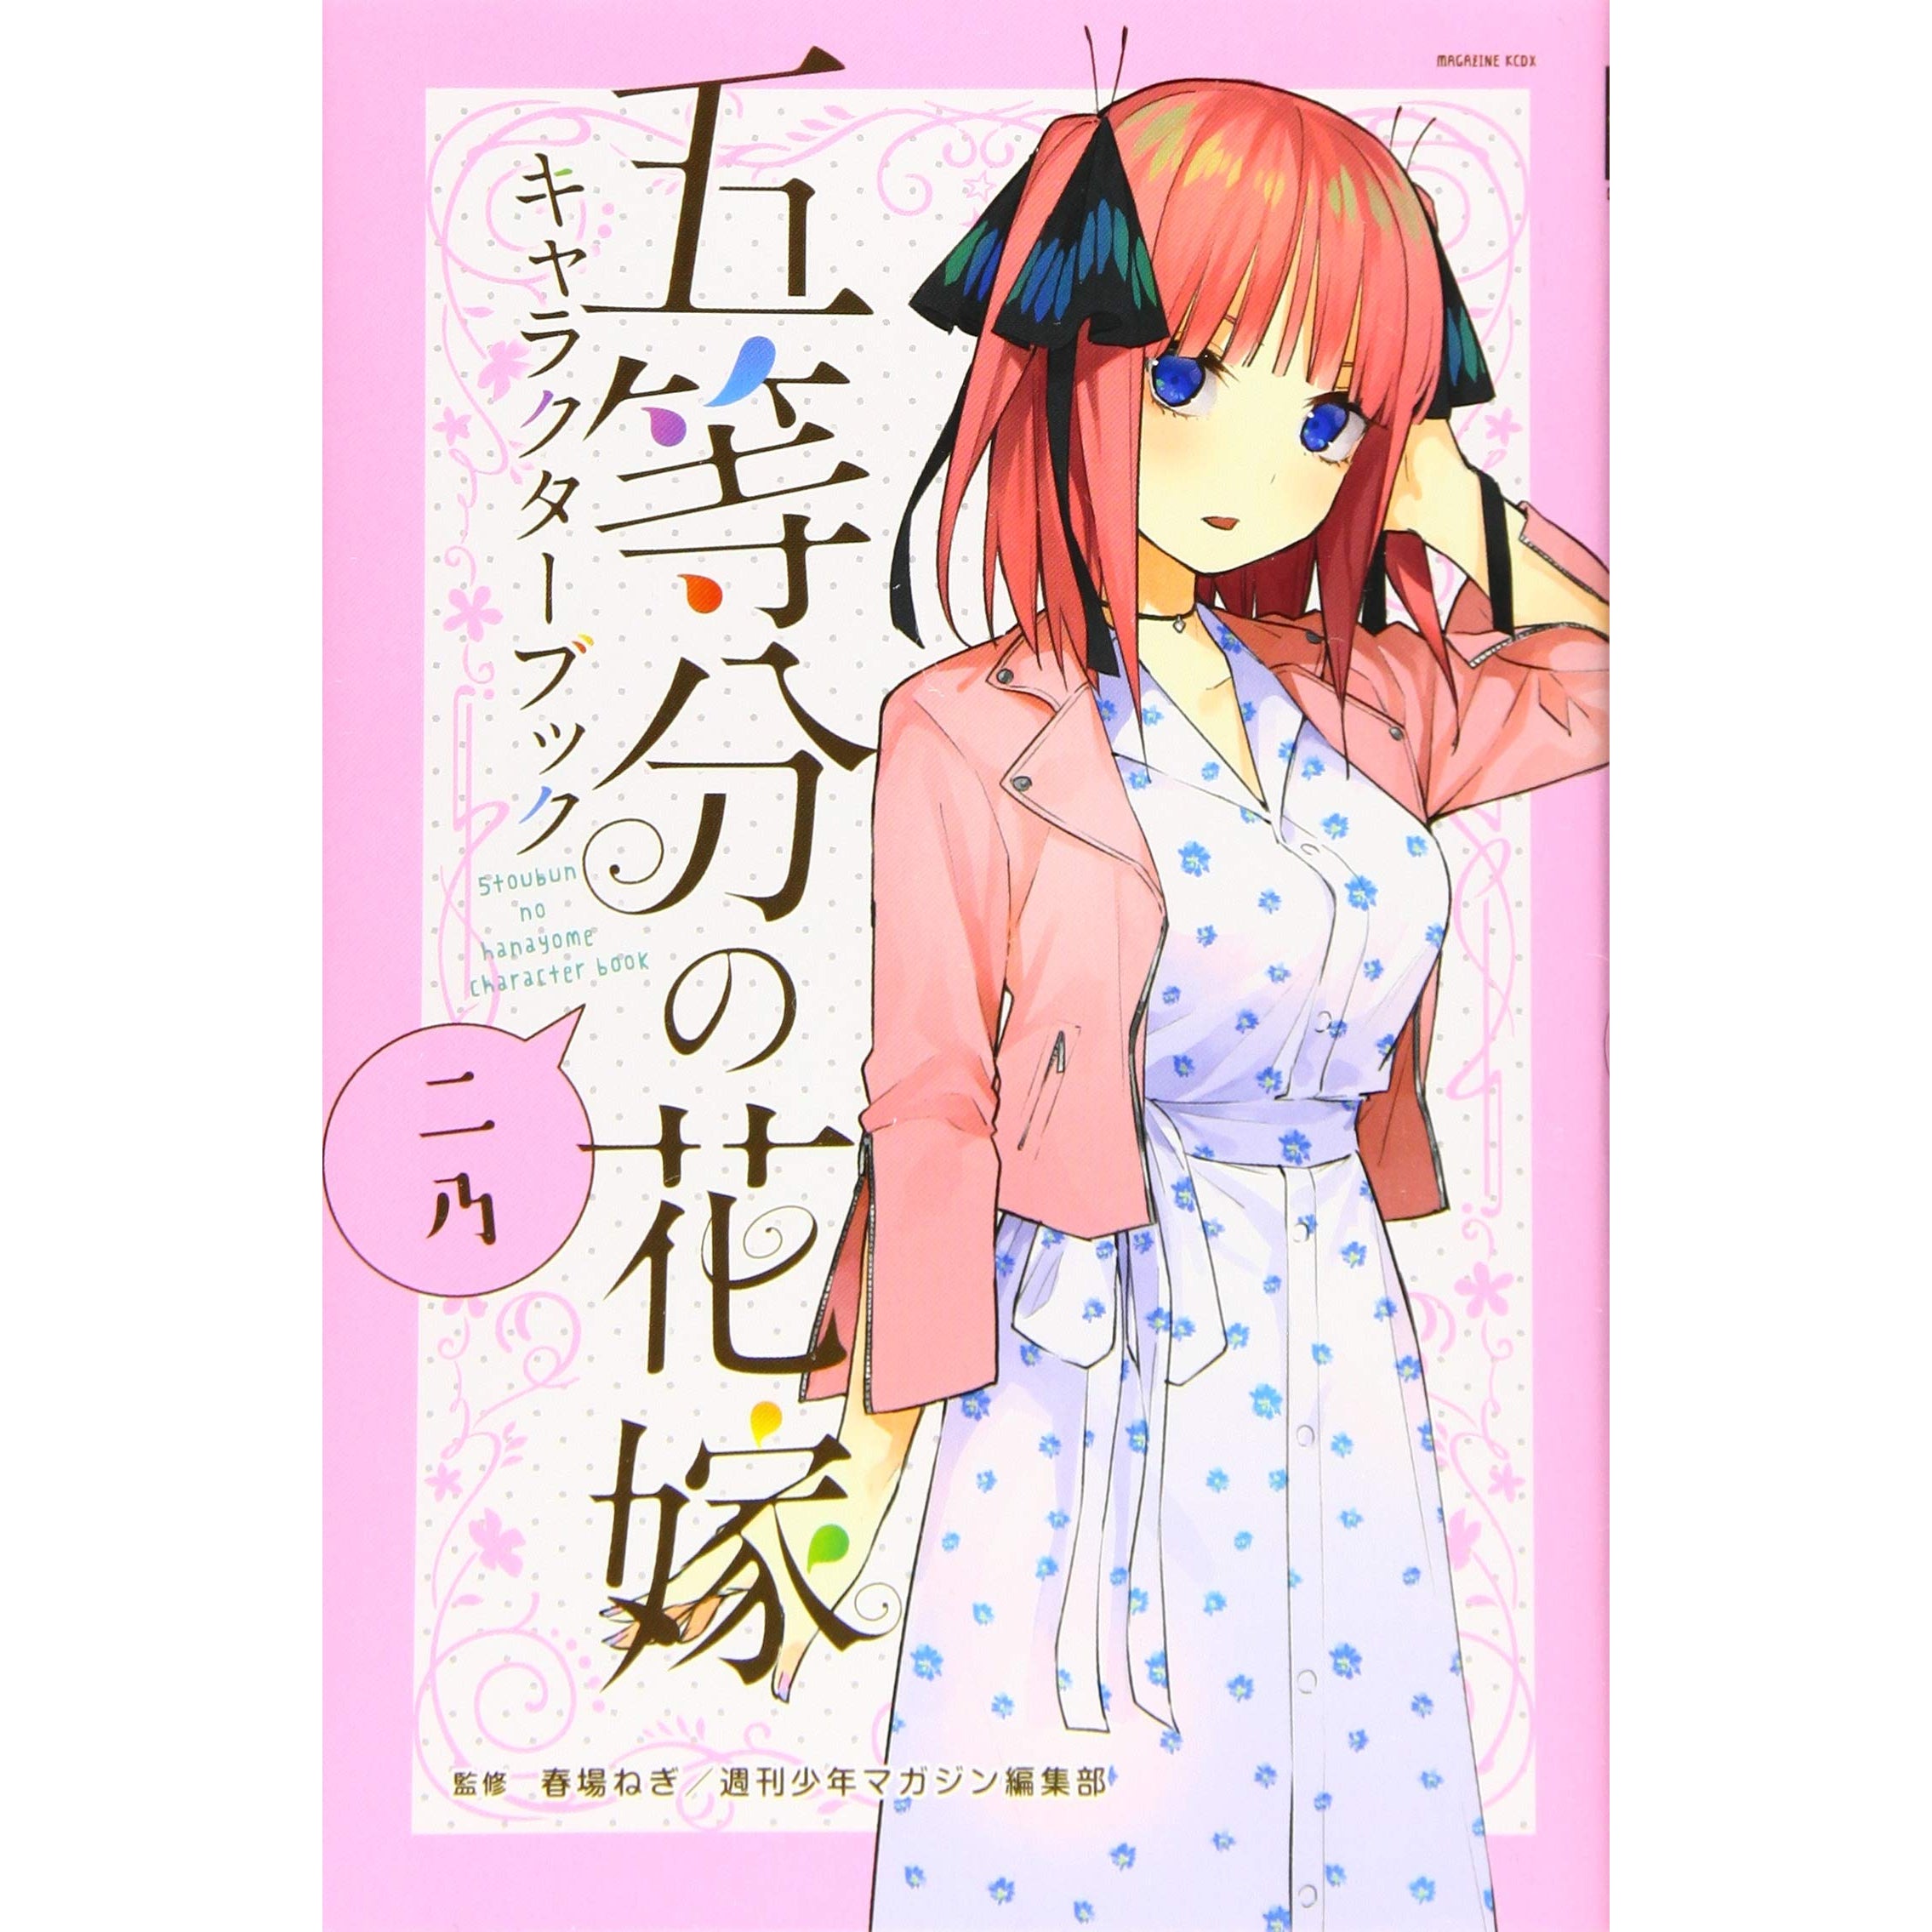 The Quintessential Quintuplets Anime Announces Its New Visual Novel Game! |  Dunia Games